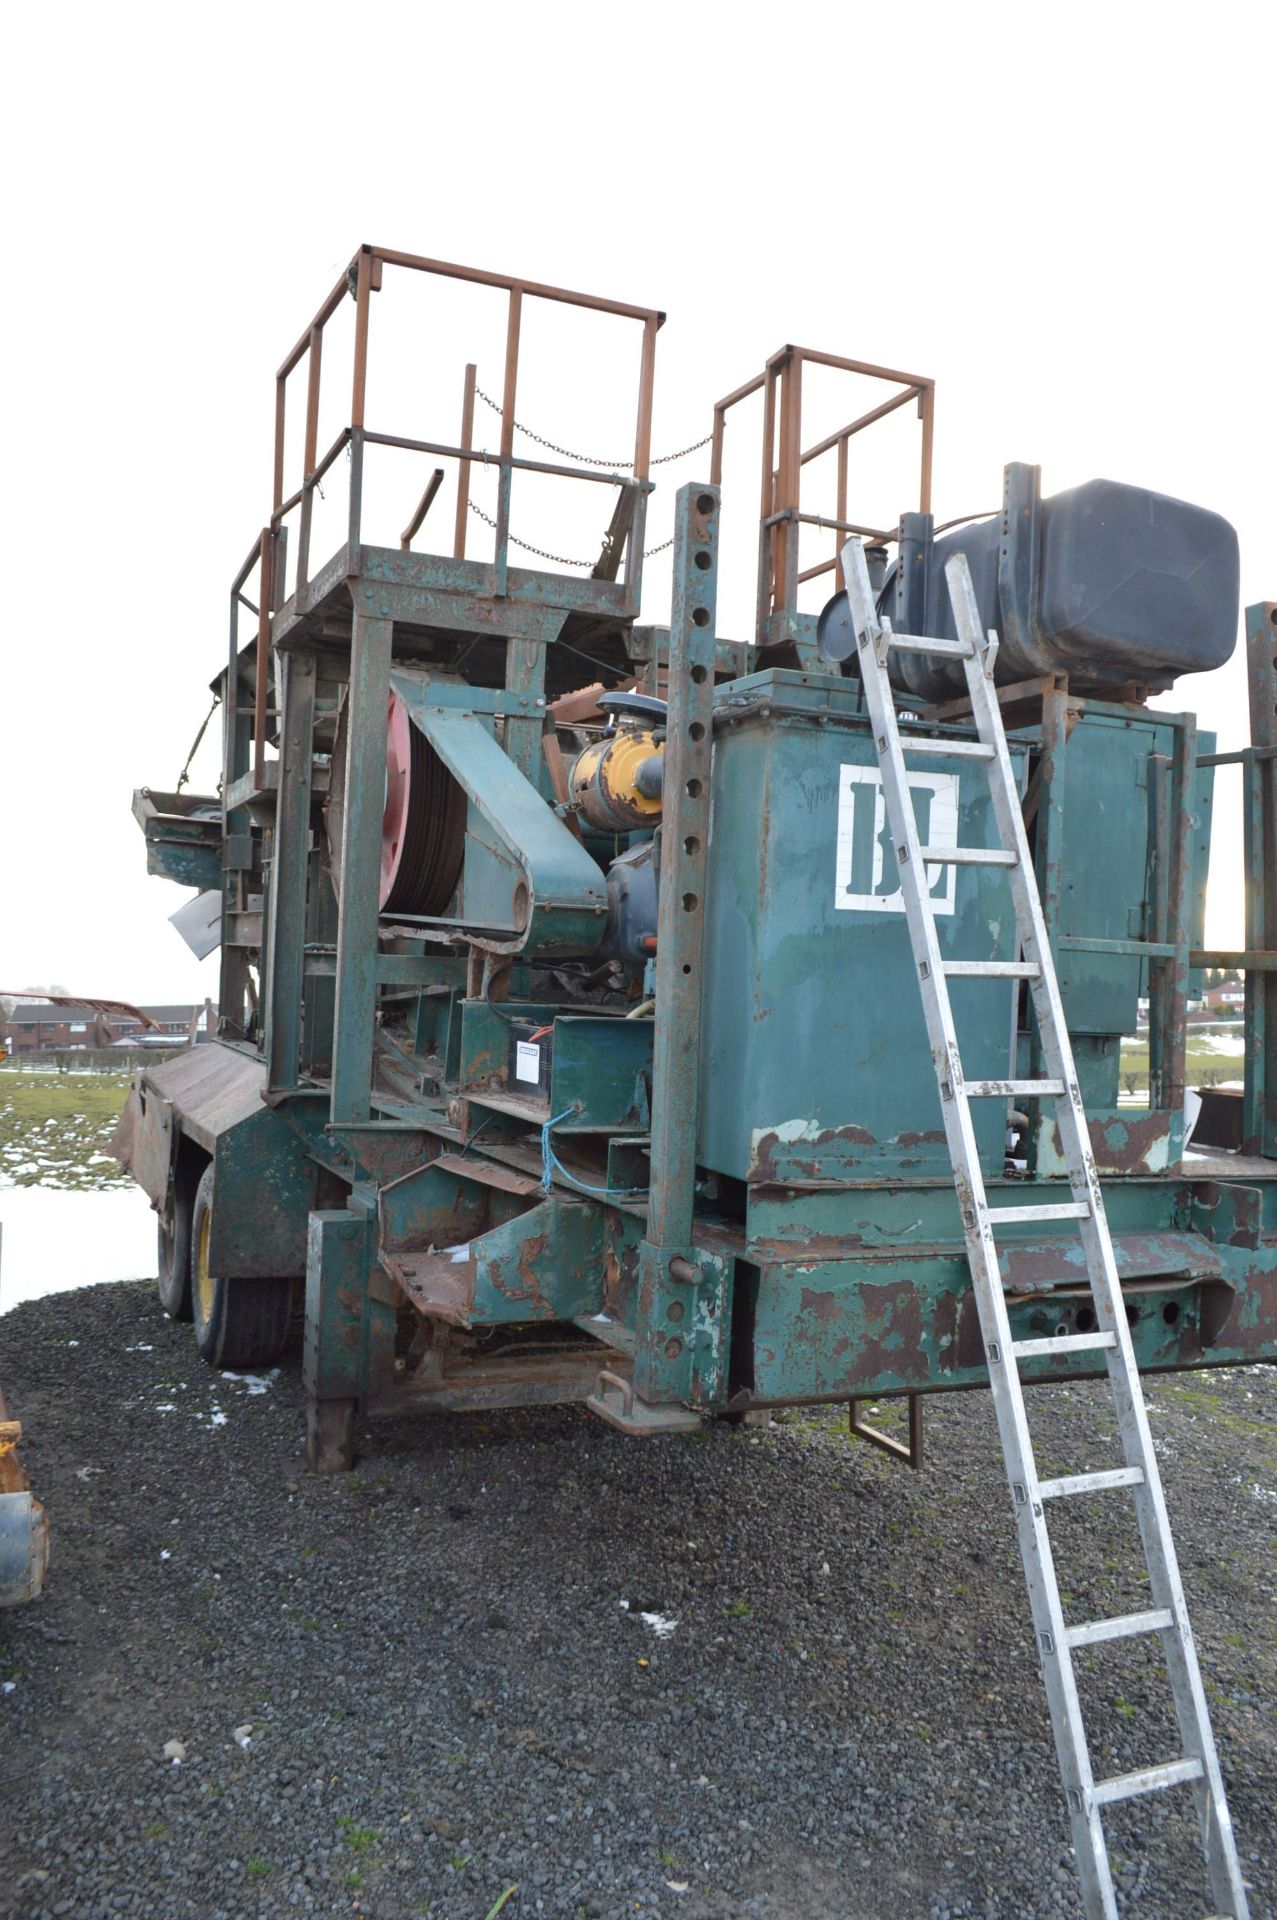 Brown Lennox TANDEM AXLE MOUNTED CRUSHER, serial no. SL9301856VP009094, with Kue-Ken 30x18 - Image 5 of 5